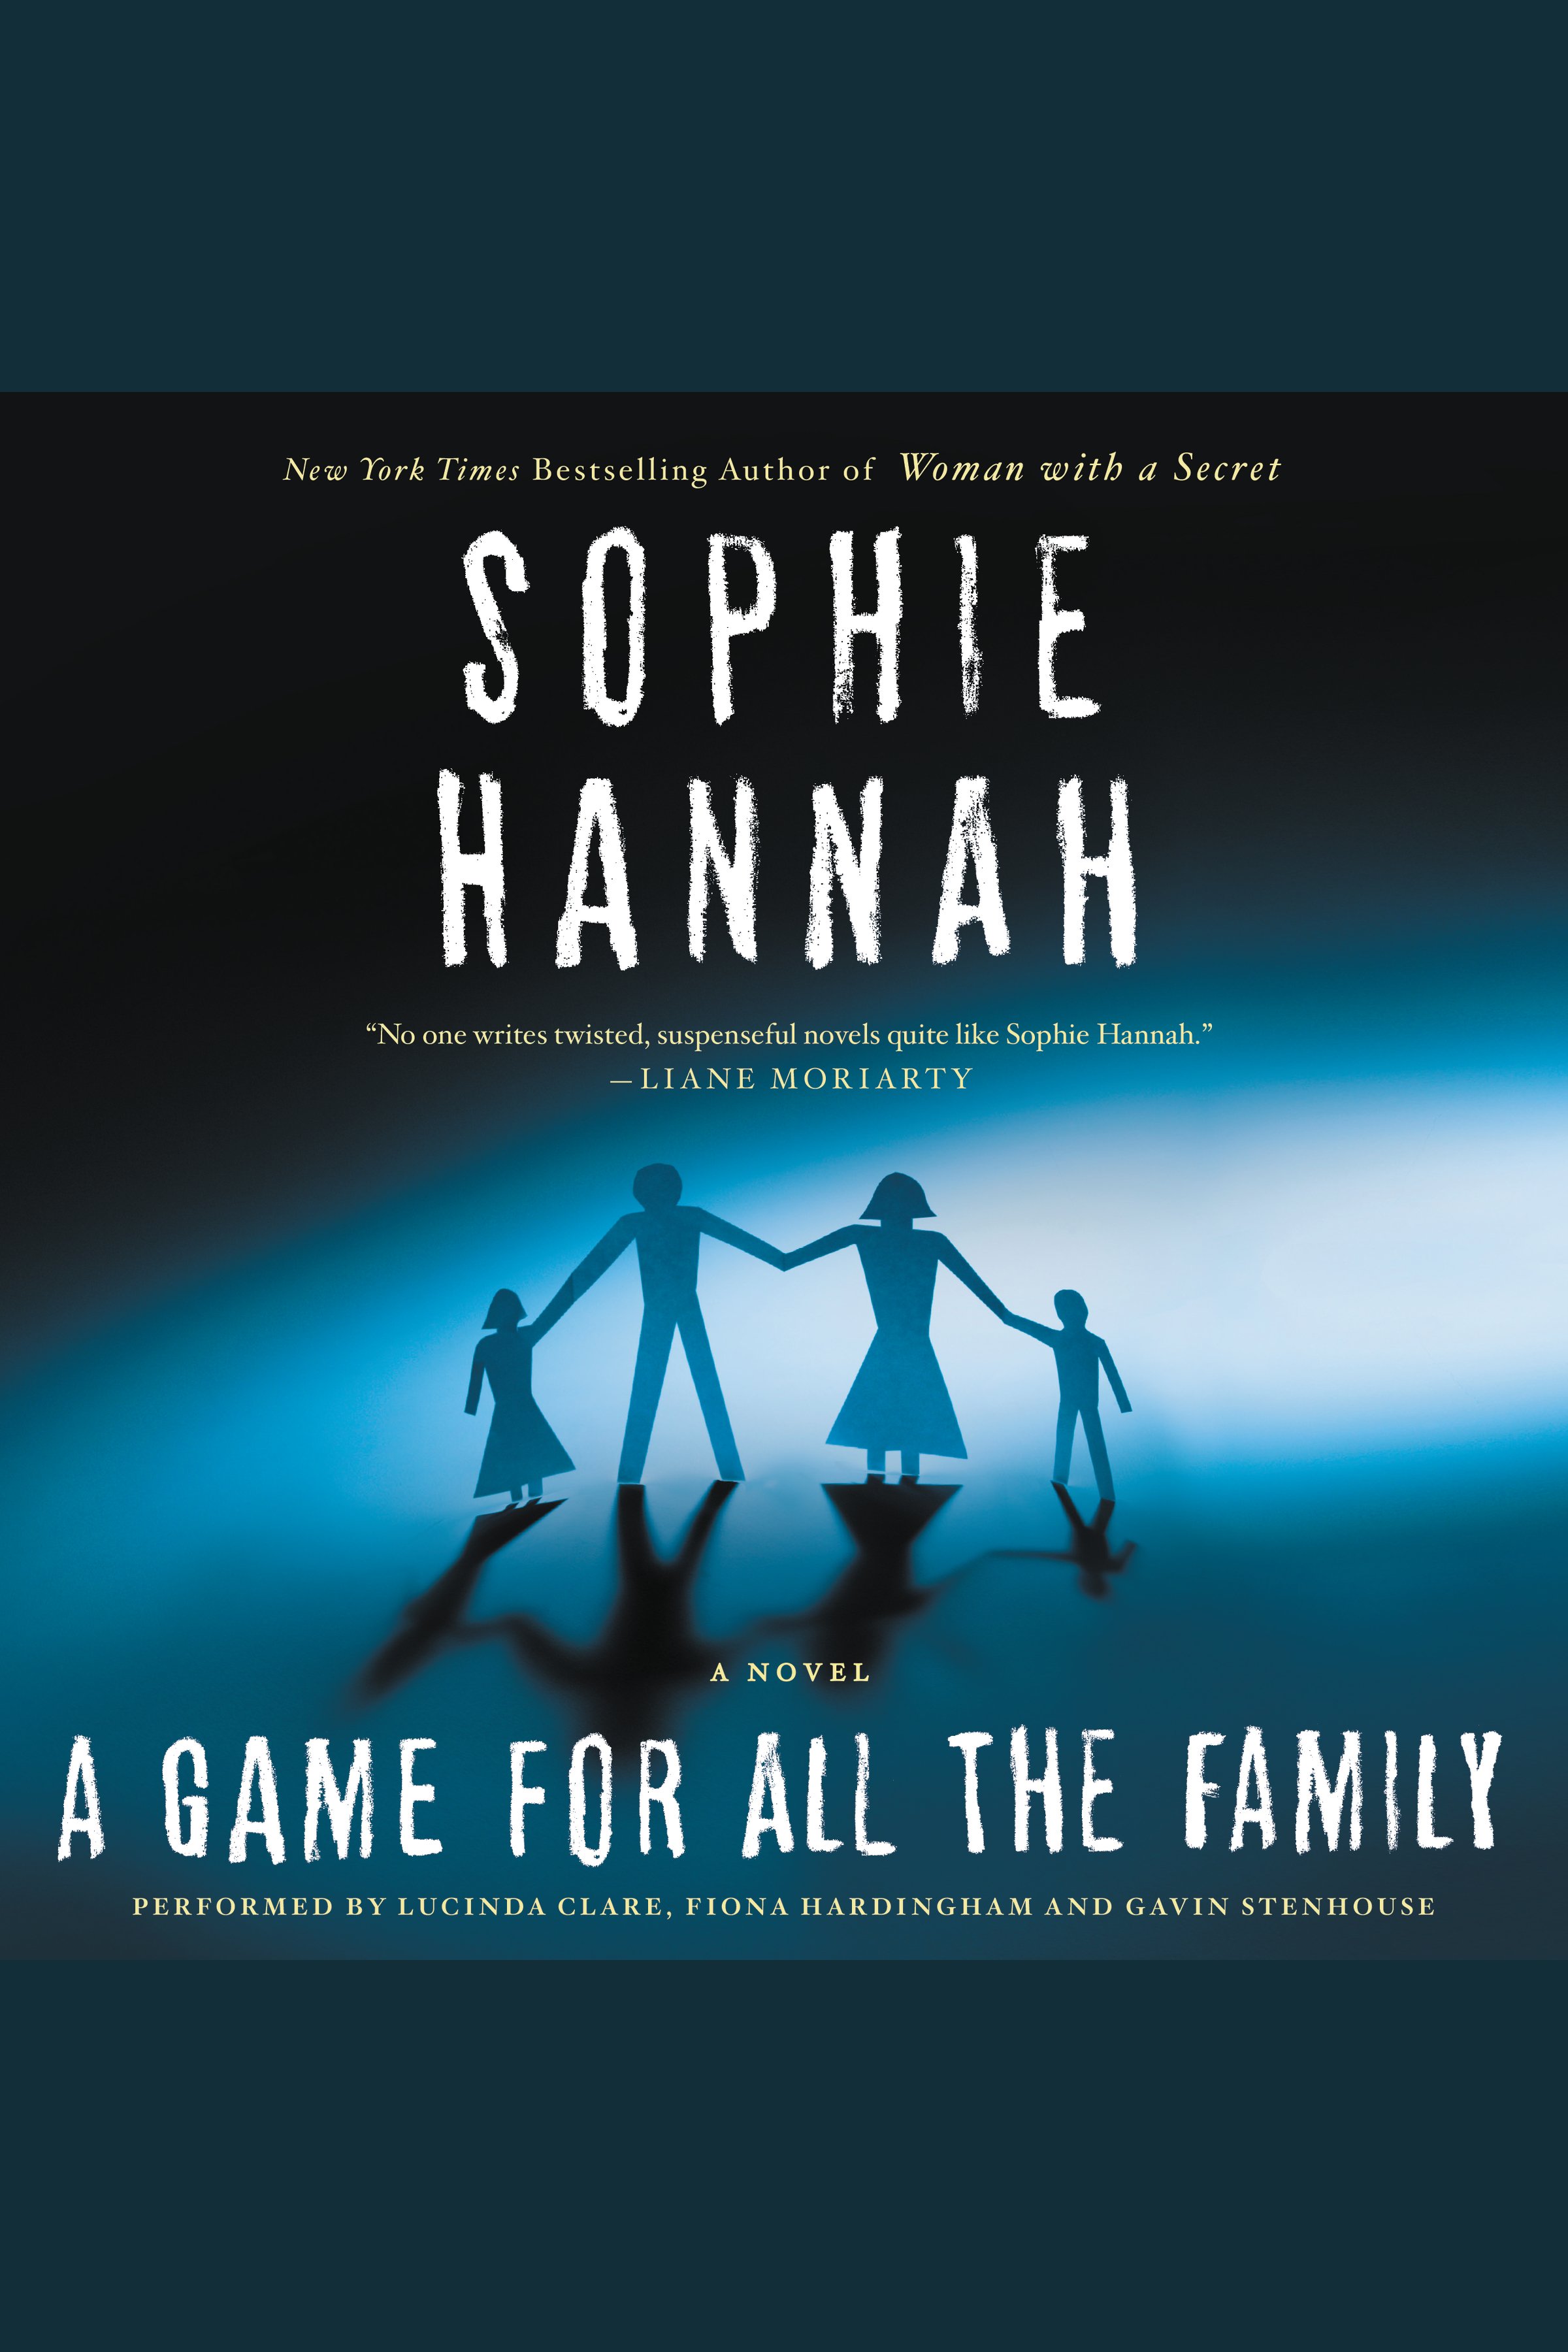 Umschlagbild für Game for All the Family, A [electronic resource] : A Novel